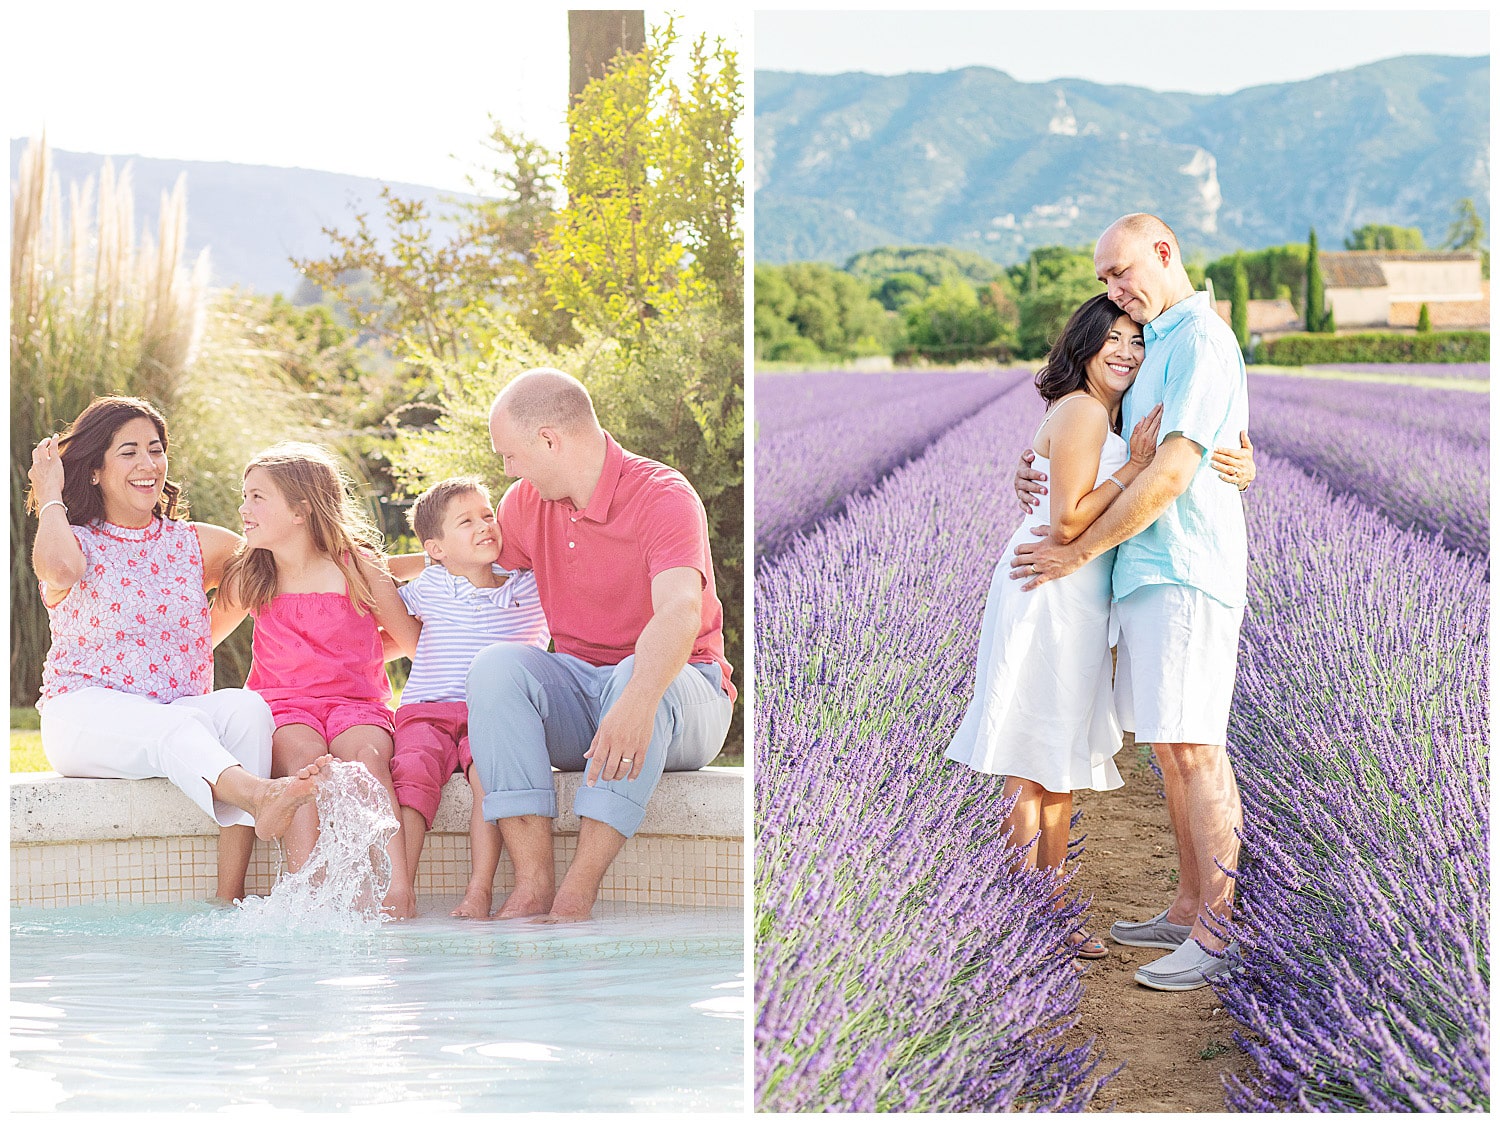 Marie-Calfopoulos-Photographe-Photographer-Provence-Avignon-Vaucluse-Luberon-Famille-Family-photo-session_0022